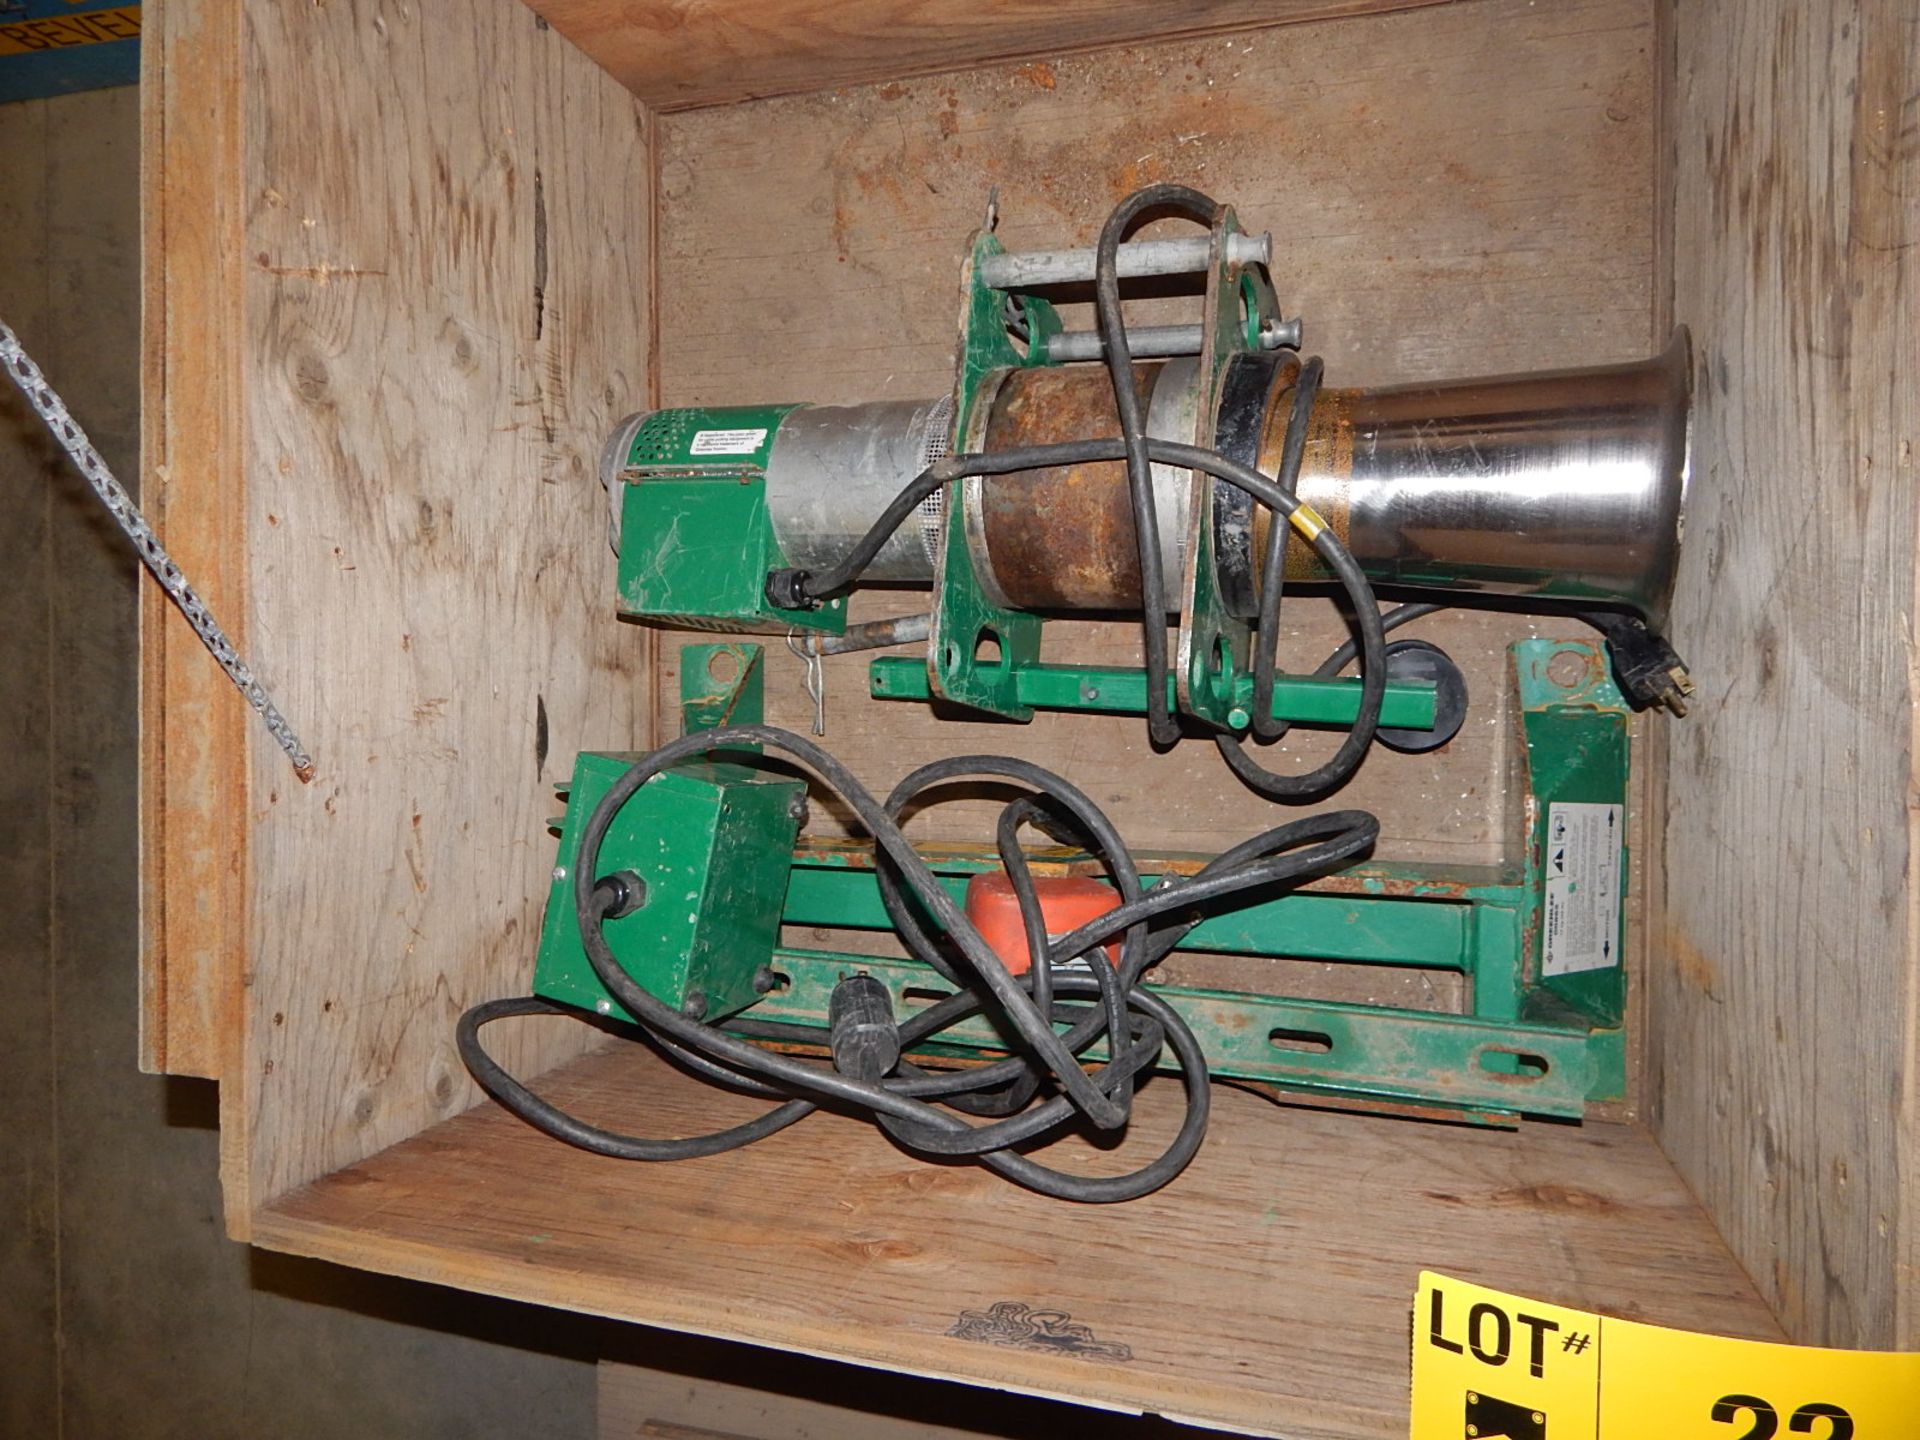 GREENLEE 6800 ULTRA TUGGER PORTABLE CABLE PULLER WITH 8,000LB MAX. CAPACITY, S/N: ABJ 9277HT - Image 2 of 2